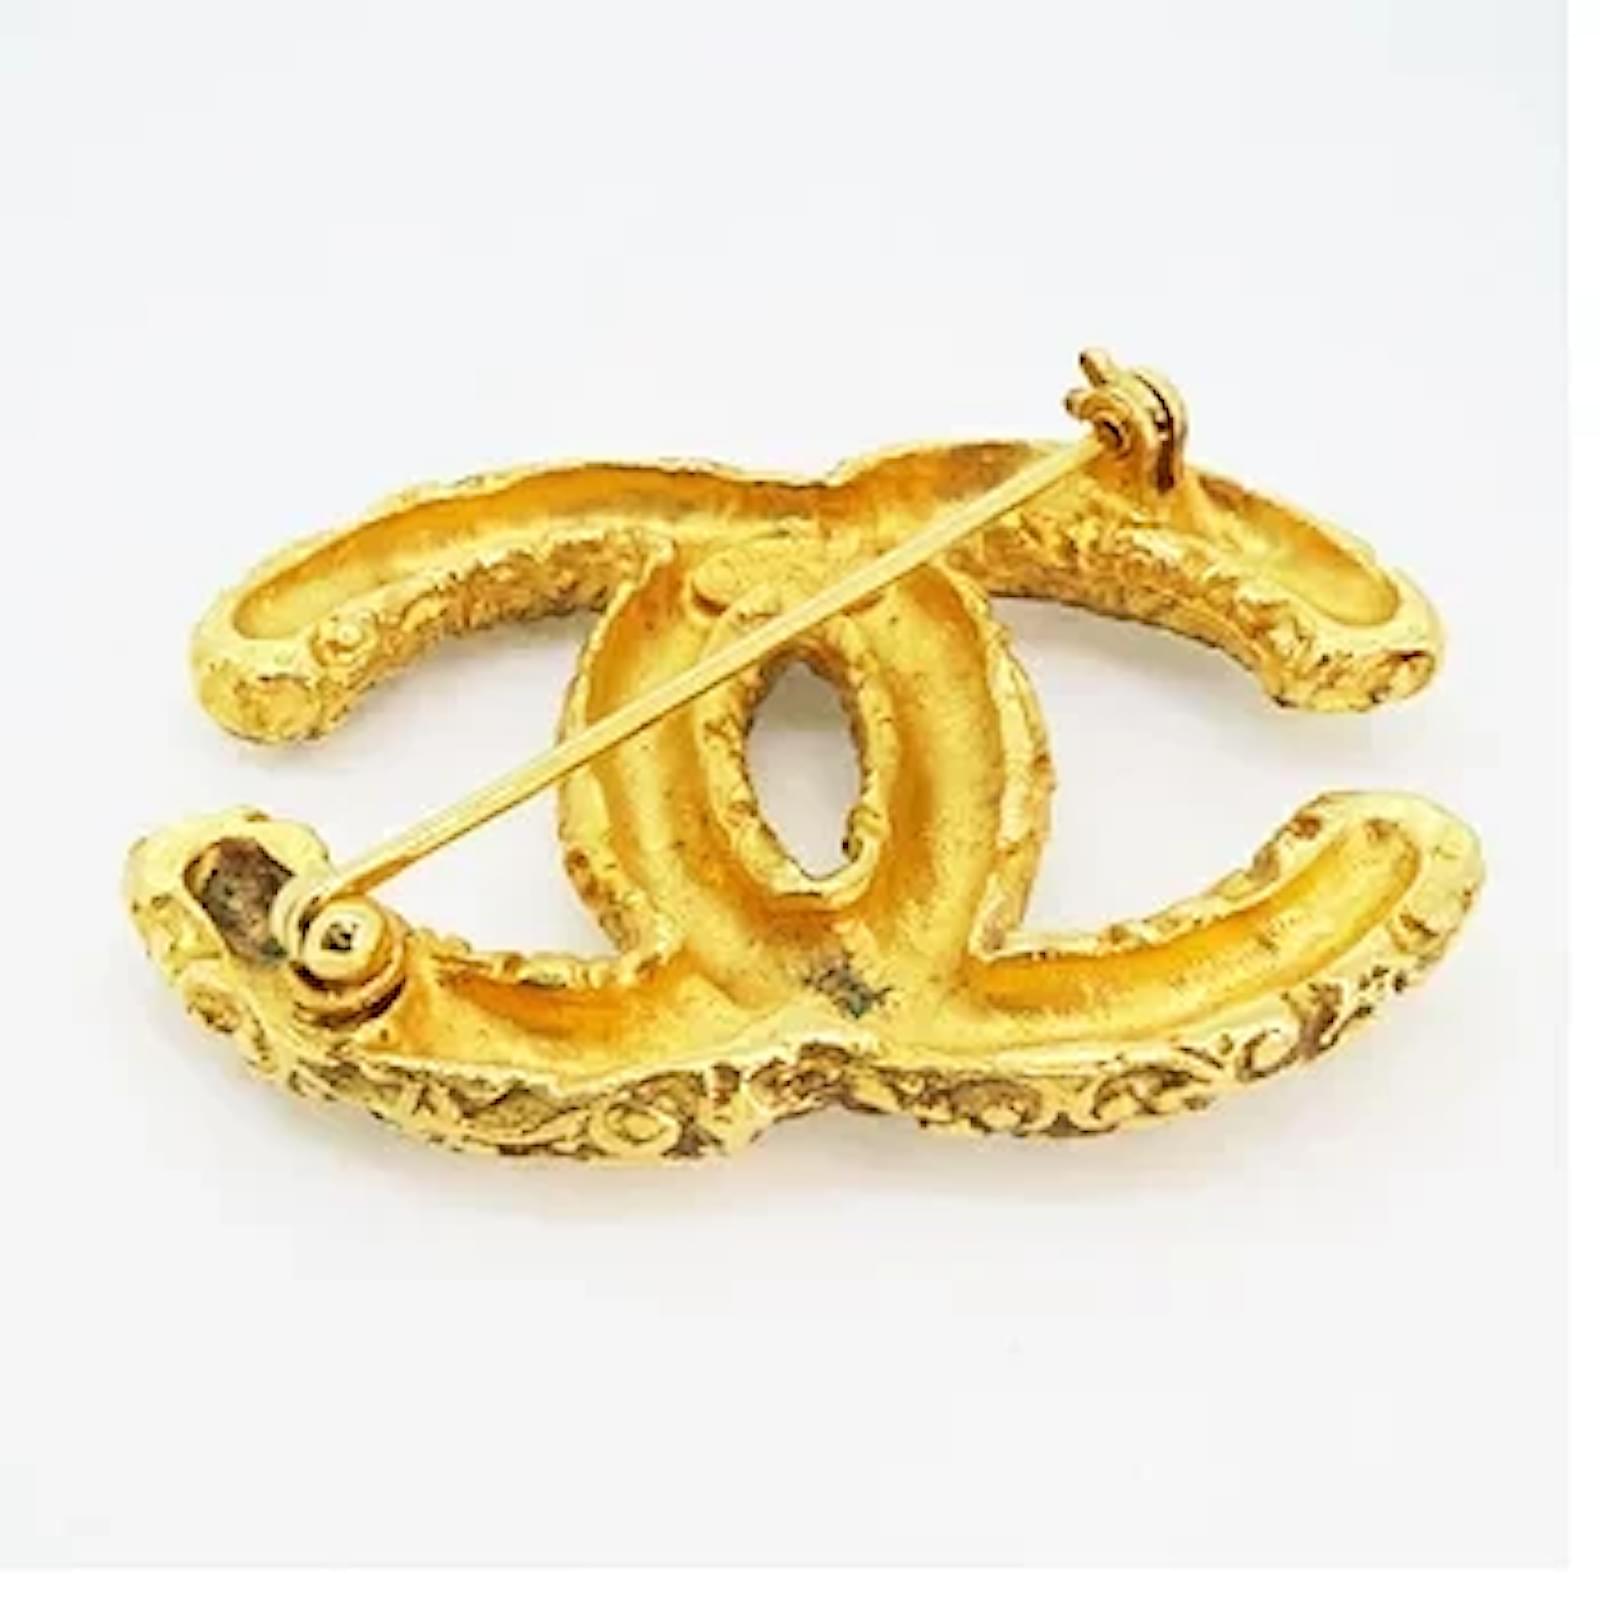 Used) Chanel Brooch Coco Mark Gold Color GP Plating 03A Golden